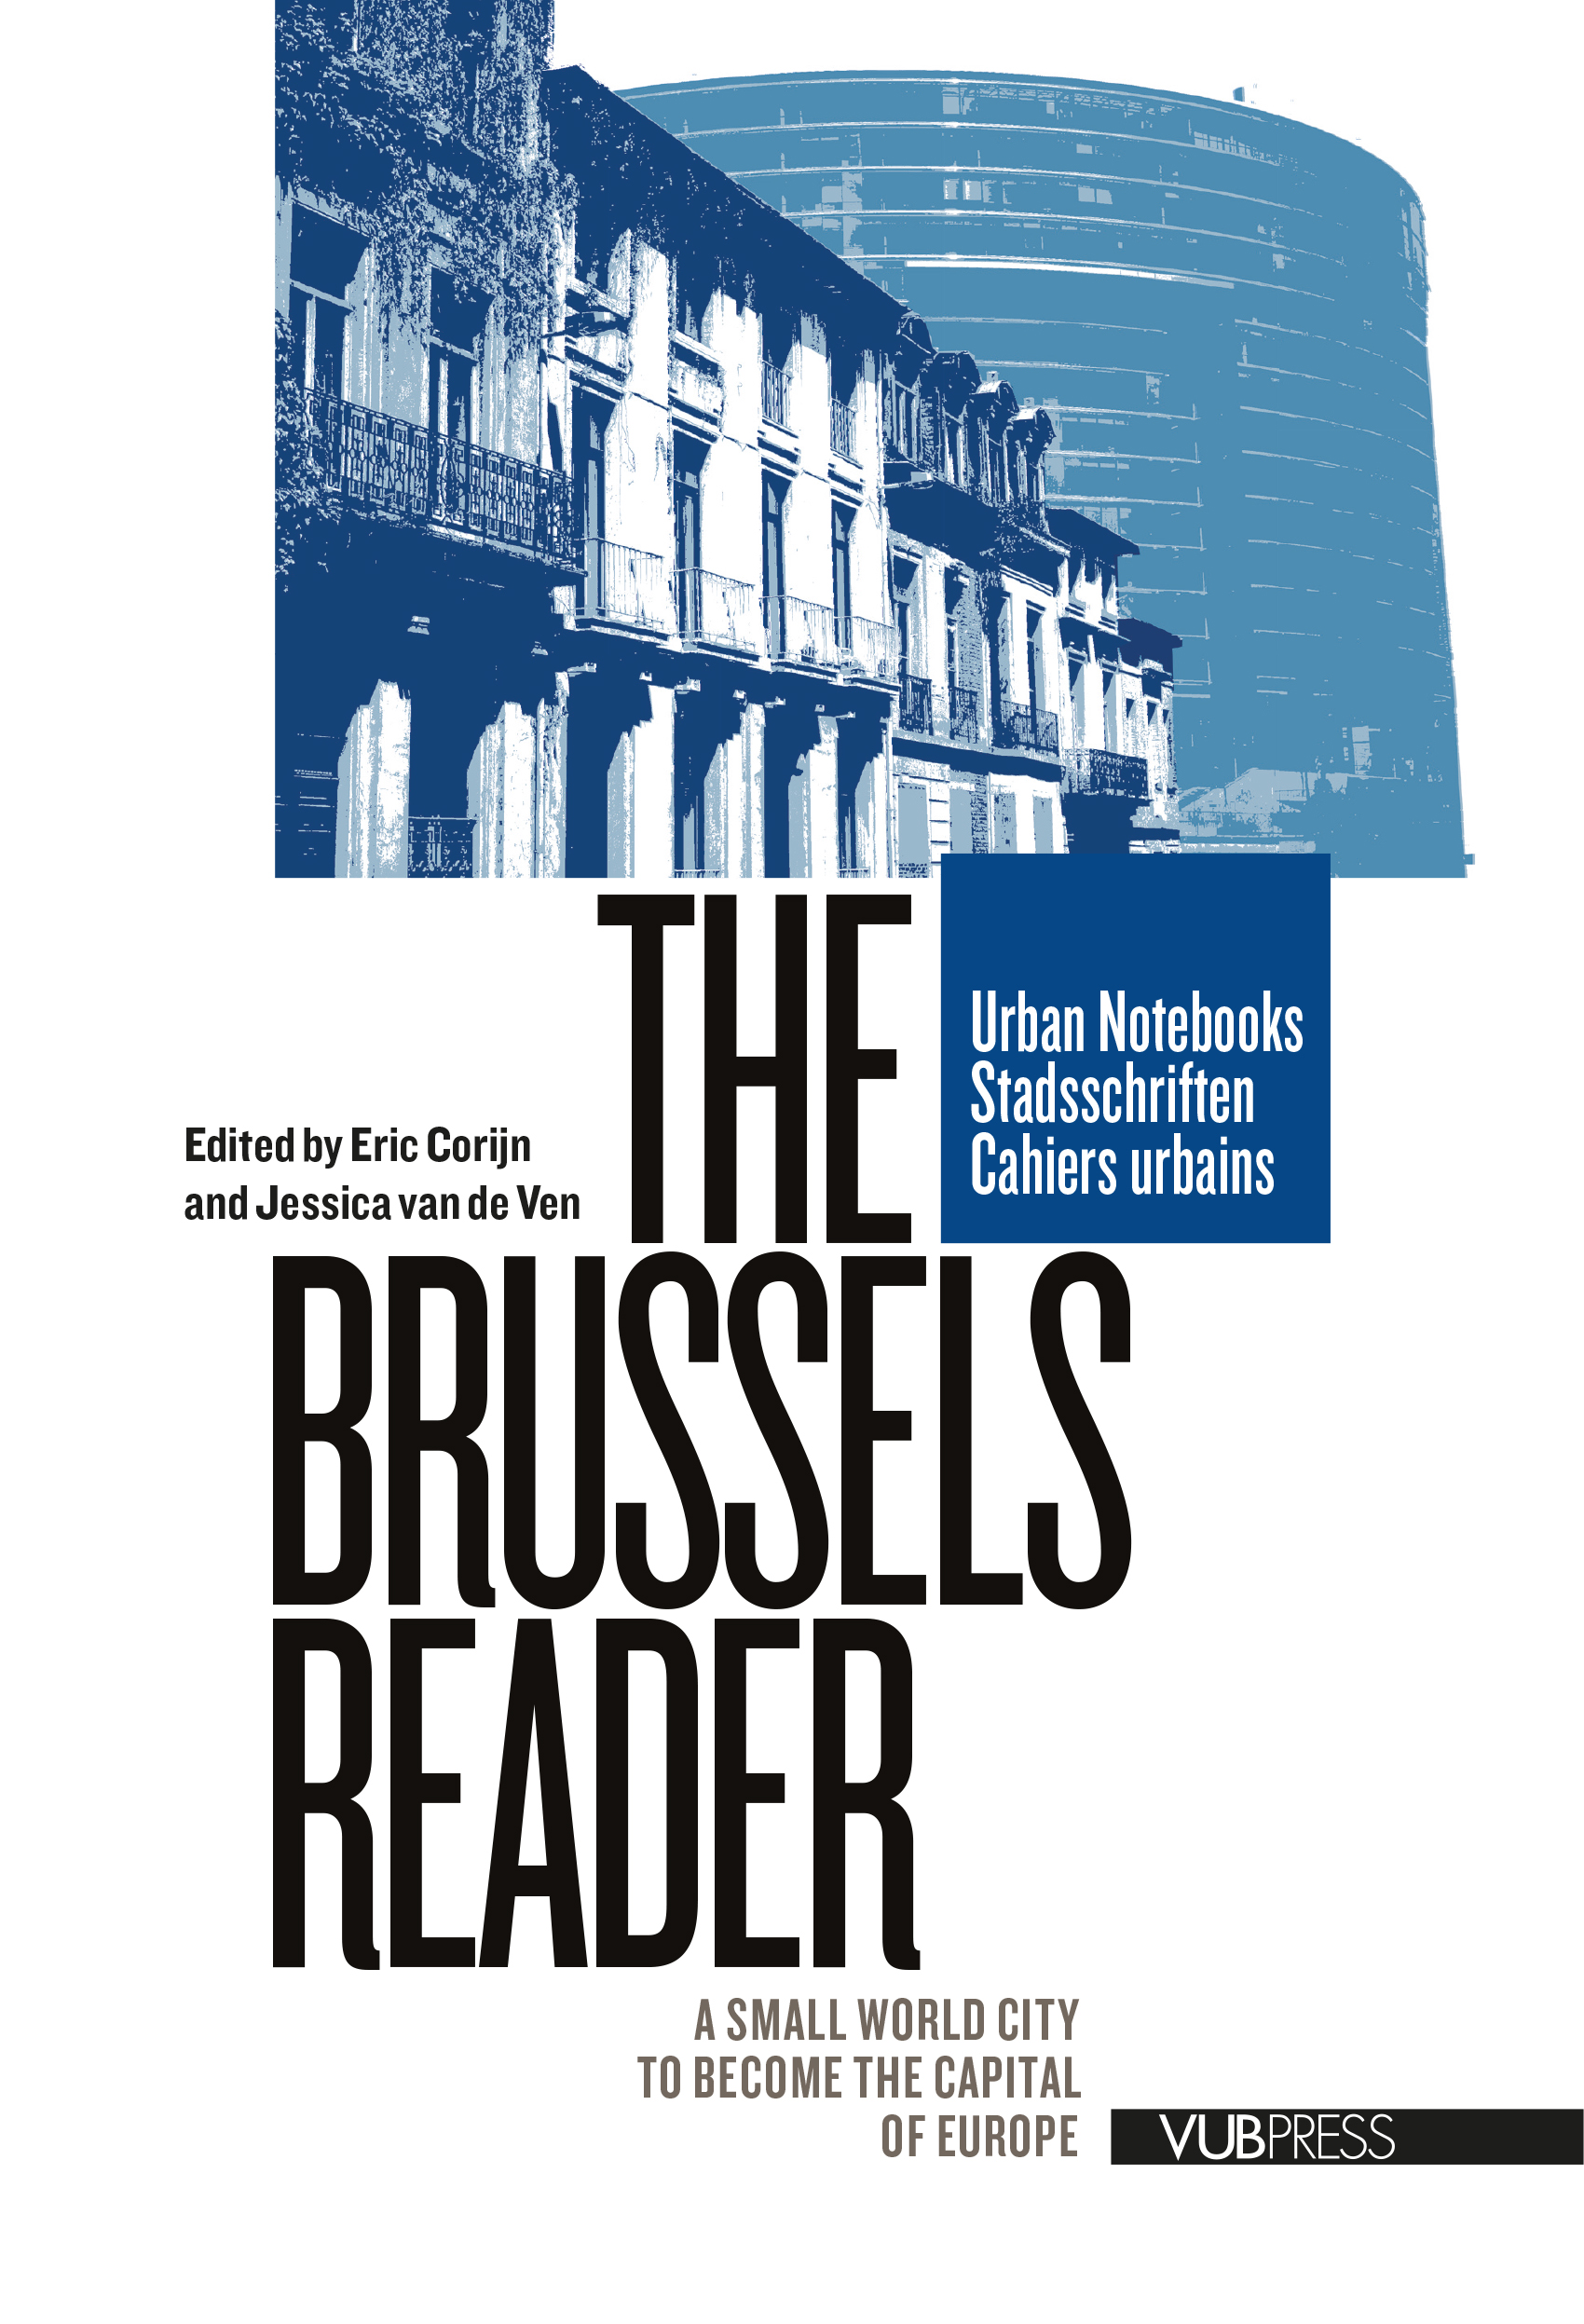 THE BRUSSELS READER